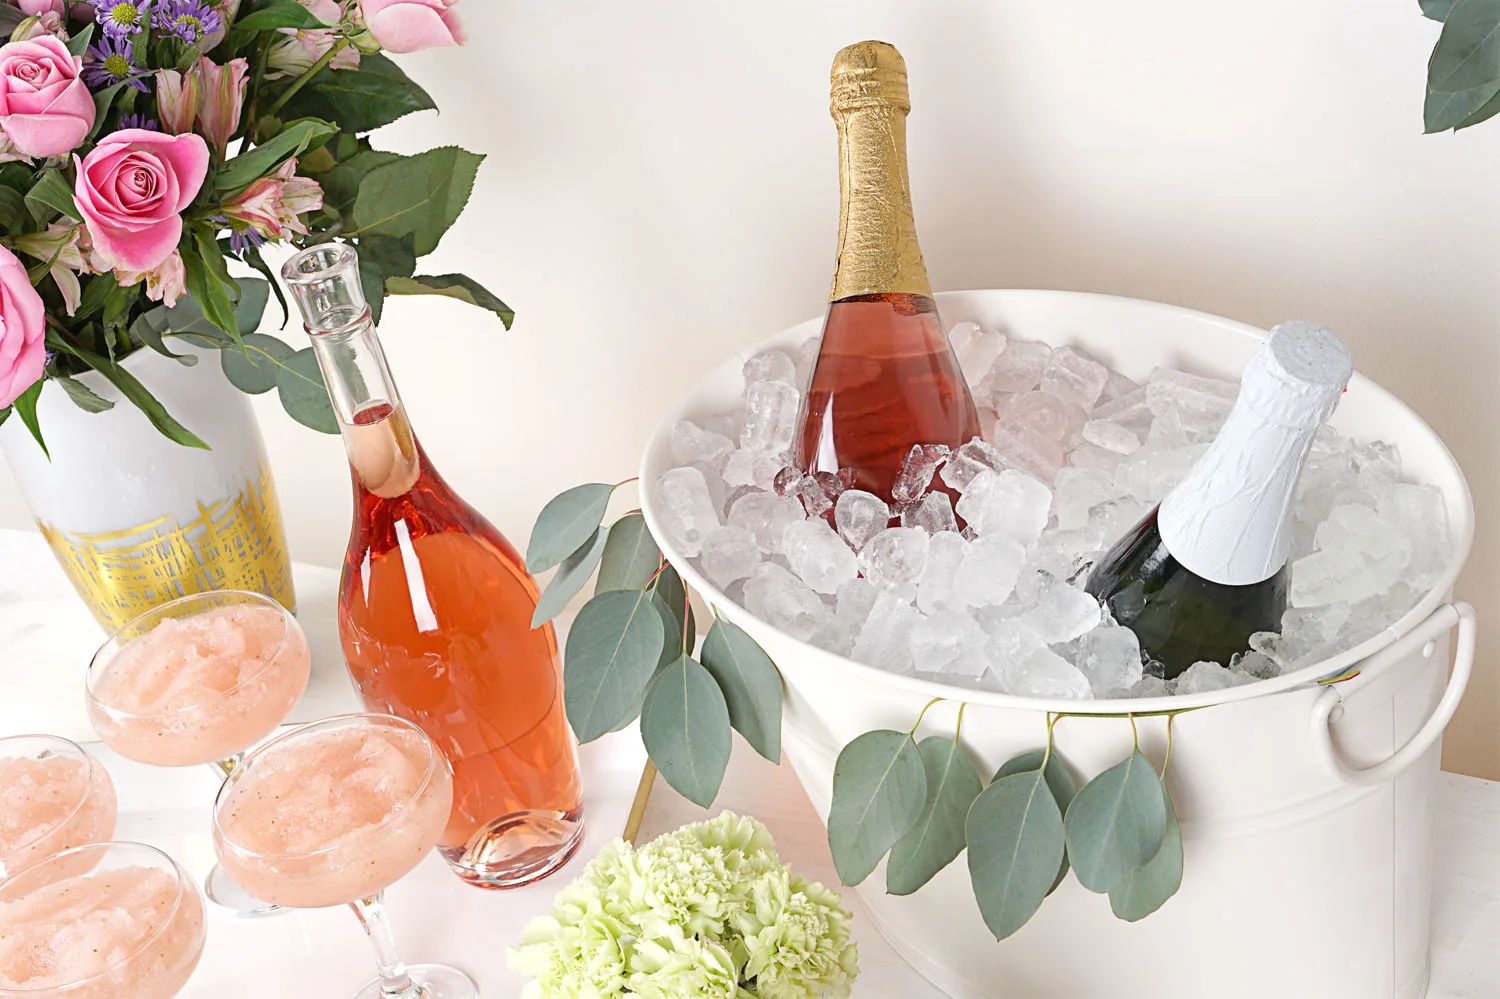 How to Host a Frosé Party